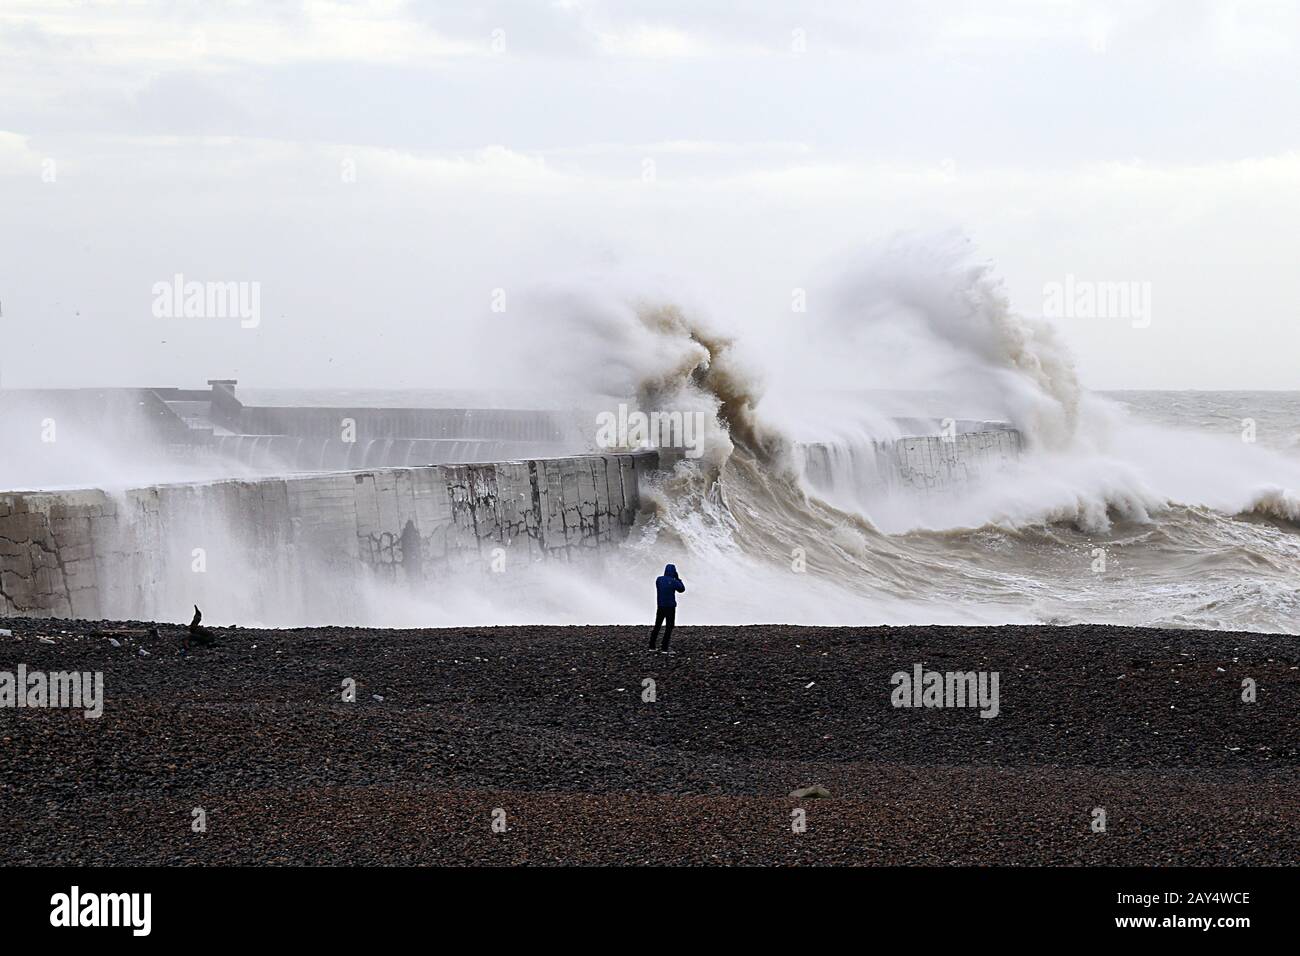 Newhaven, East Sussex, United Kingdom. Storm Ciara brings high winds and mountainous seas, to the south coast. Stock Photo